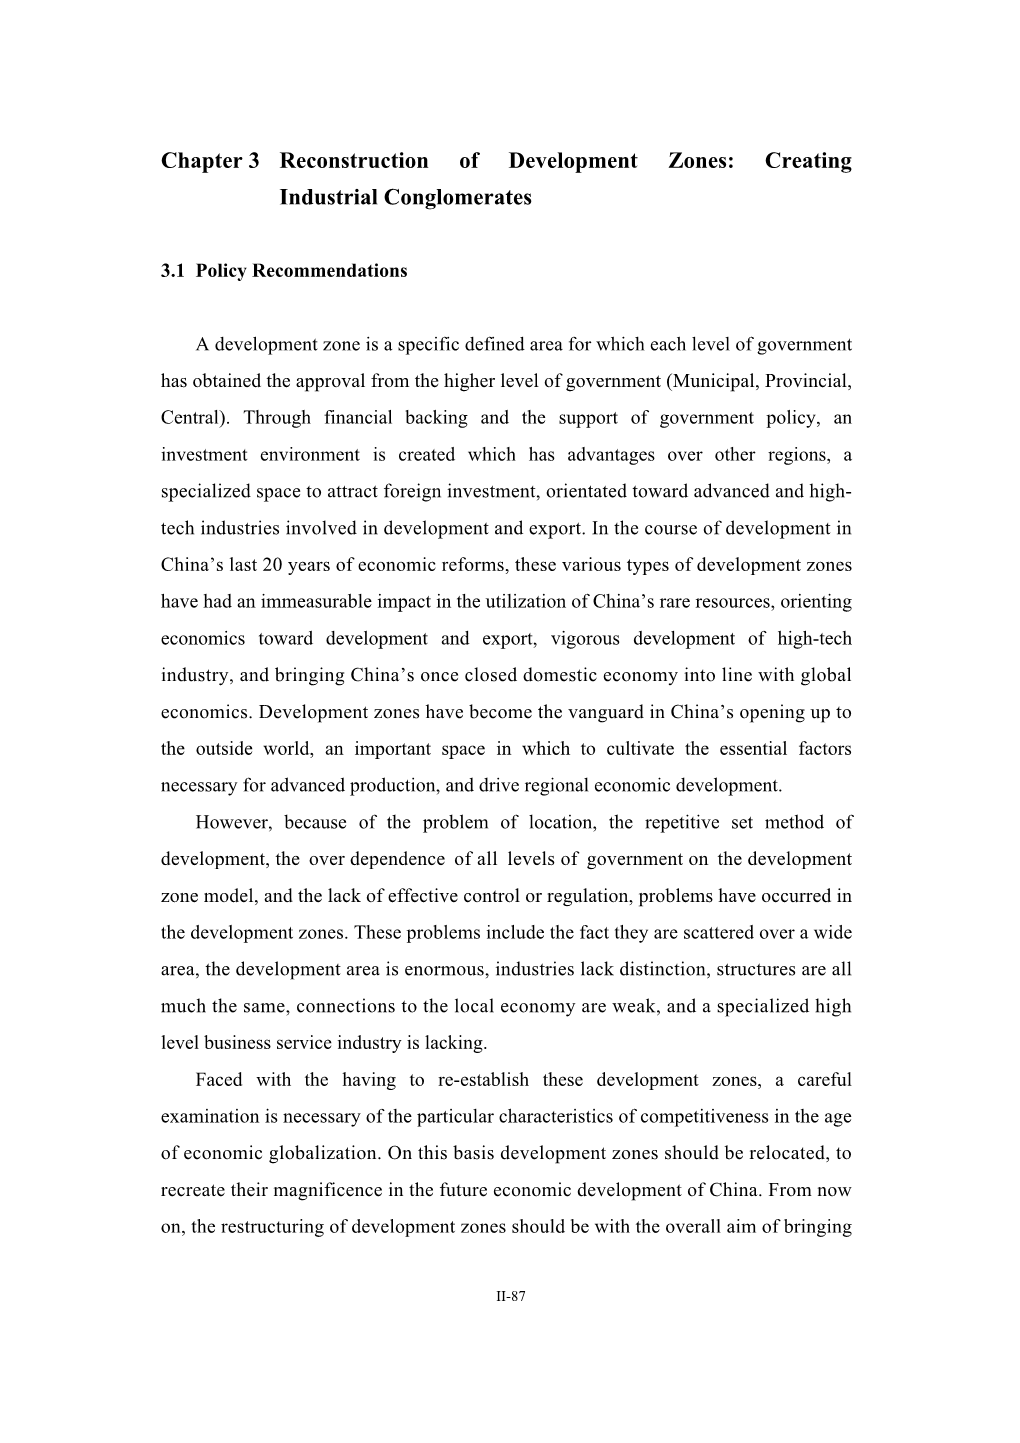 Chapter 3 Reconstruction of Development Zones: Creating Industrial Conglomerates